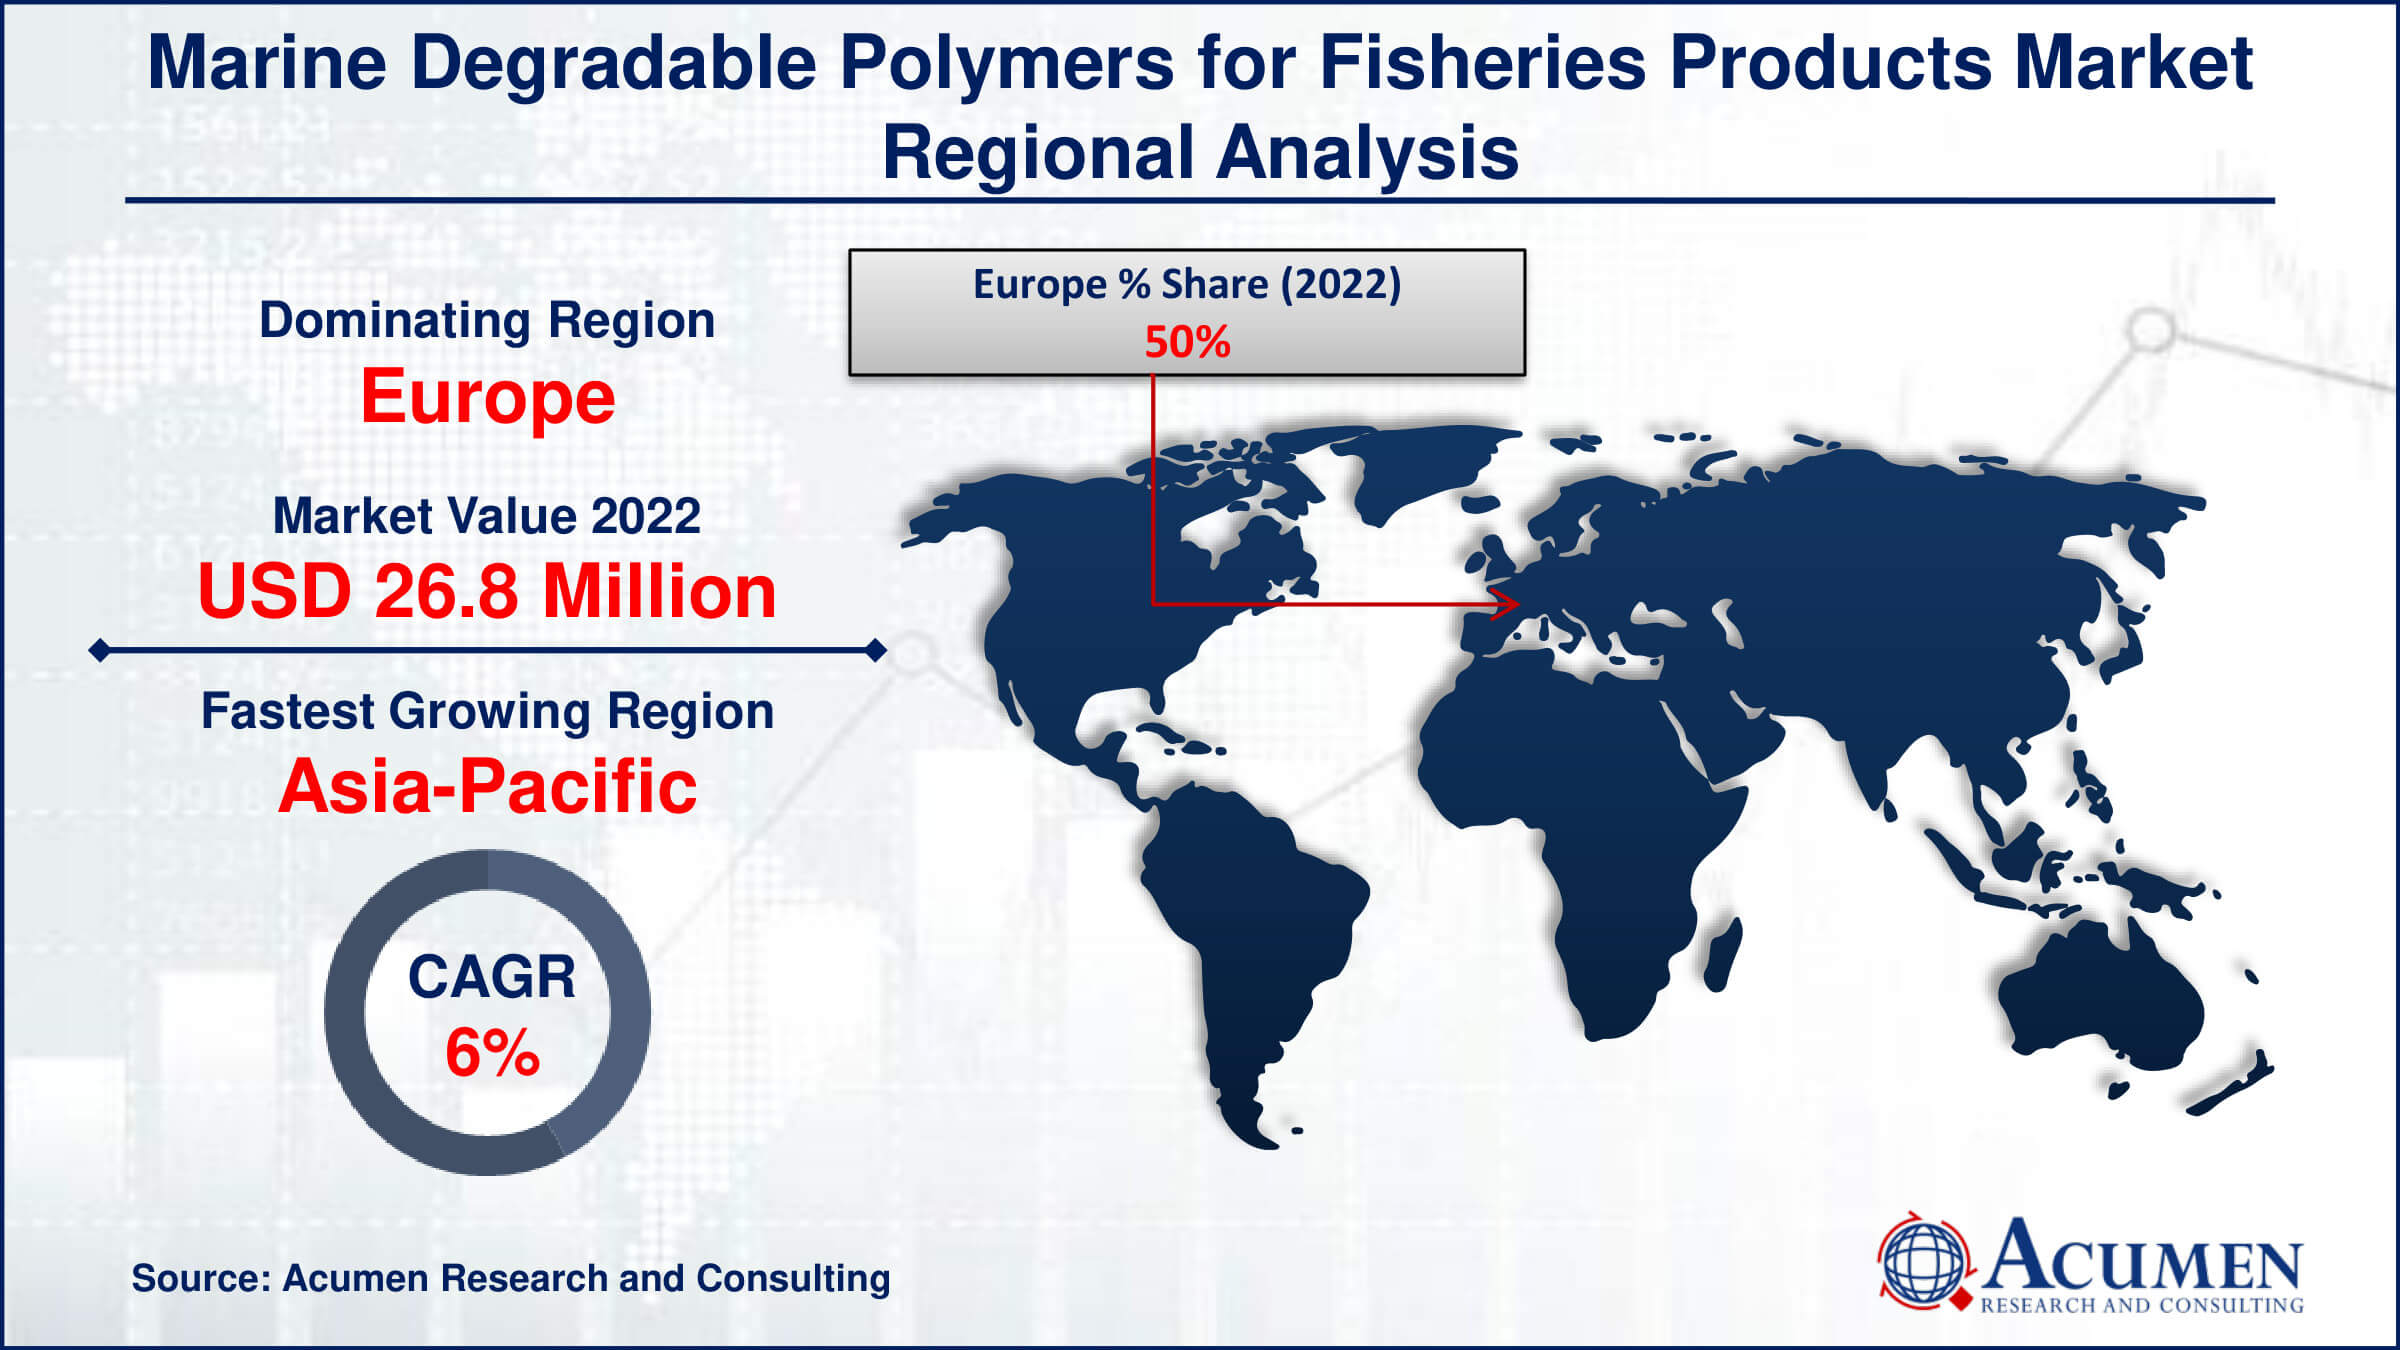 Marine Degradable Polymers for Fisheries Products Market Drivers